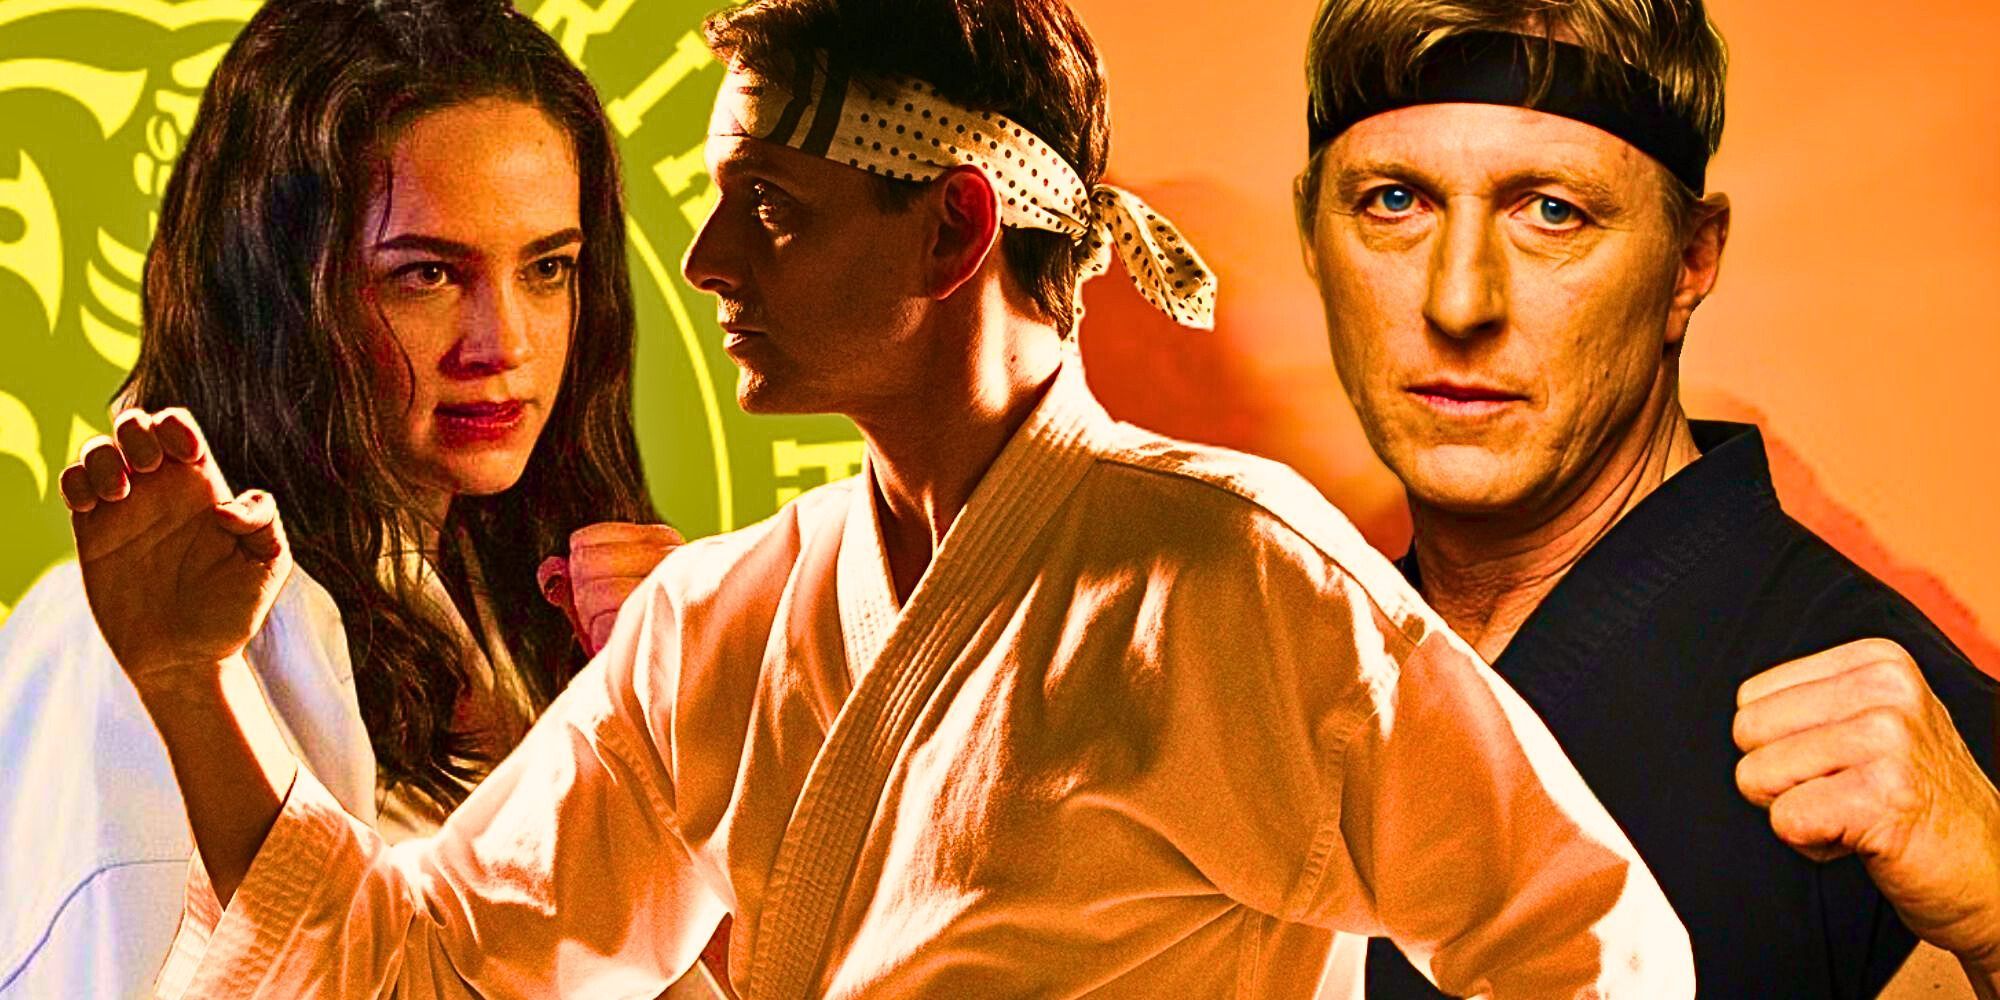 Jeff Kay: Why Cobra Kai Season 5 Honored The Late Assistant Director